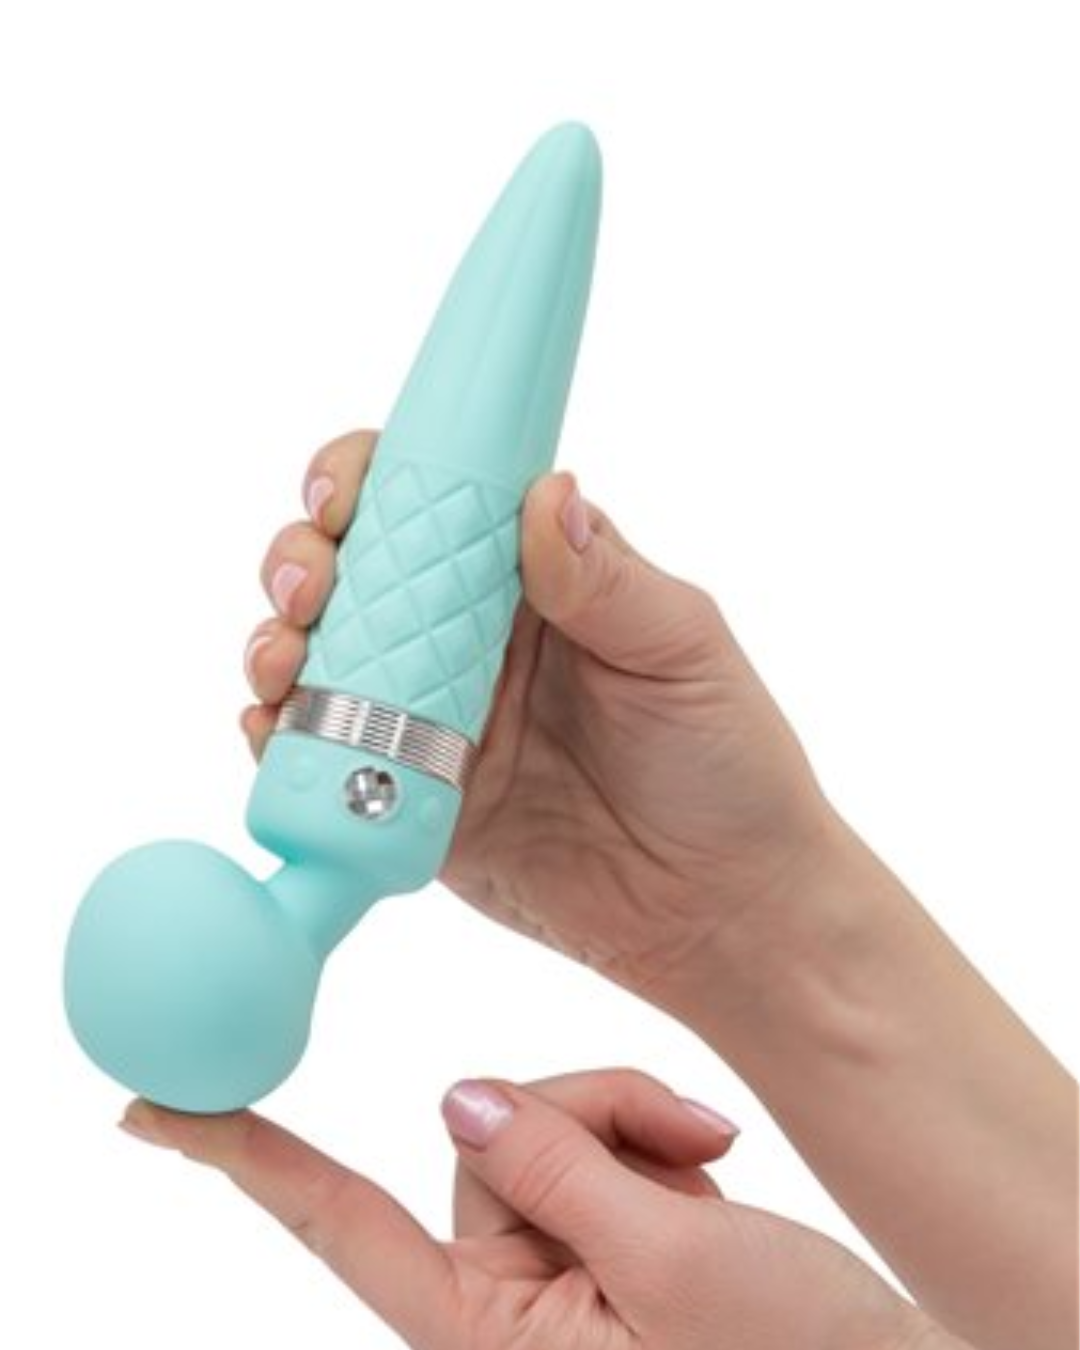 Pillow Talk Sultry Waterproof Double Ended Wand Vibrator - Teal held in a hand with a finger showing the flexibility of the neck